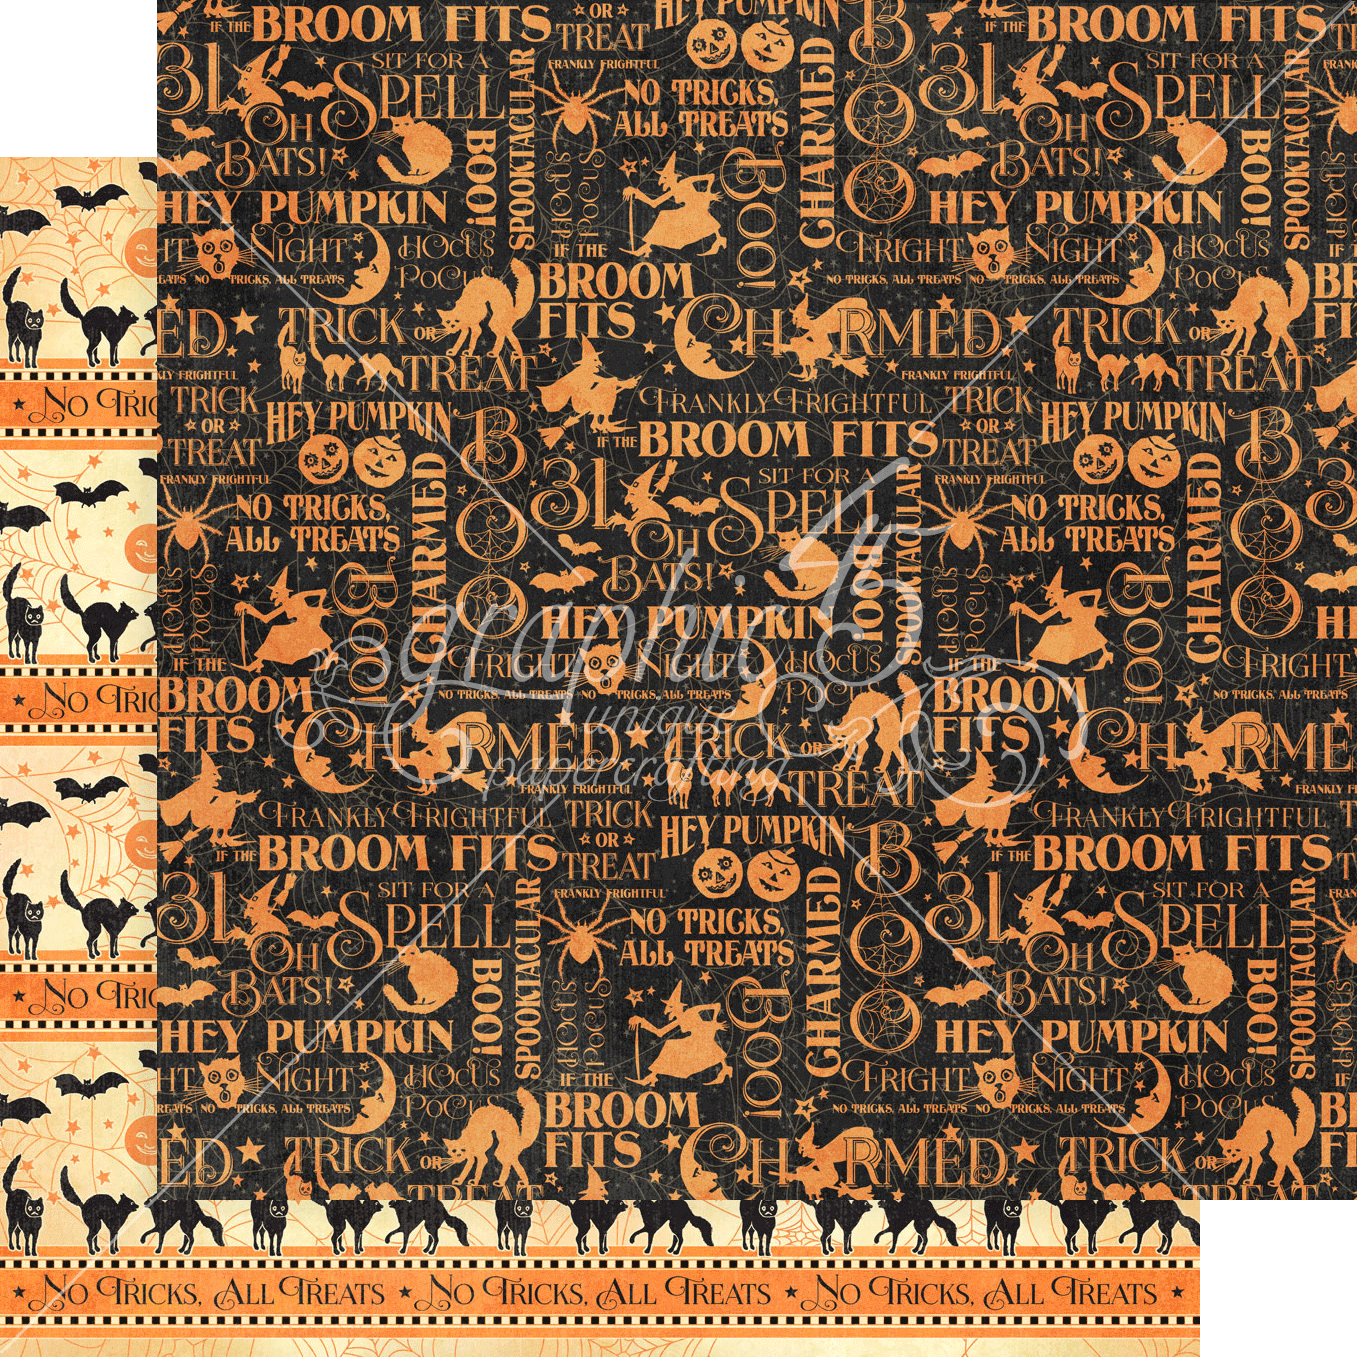 Charmed Collection Oh Bats 12 x 12 Double-Sided Scrapbook Paper by Graphic 45 - Scrapbook Supply Companies